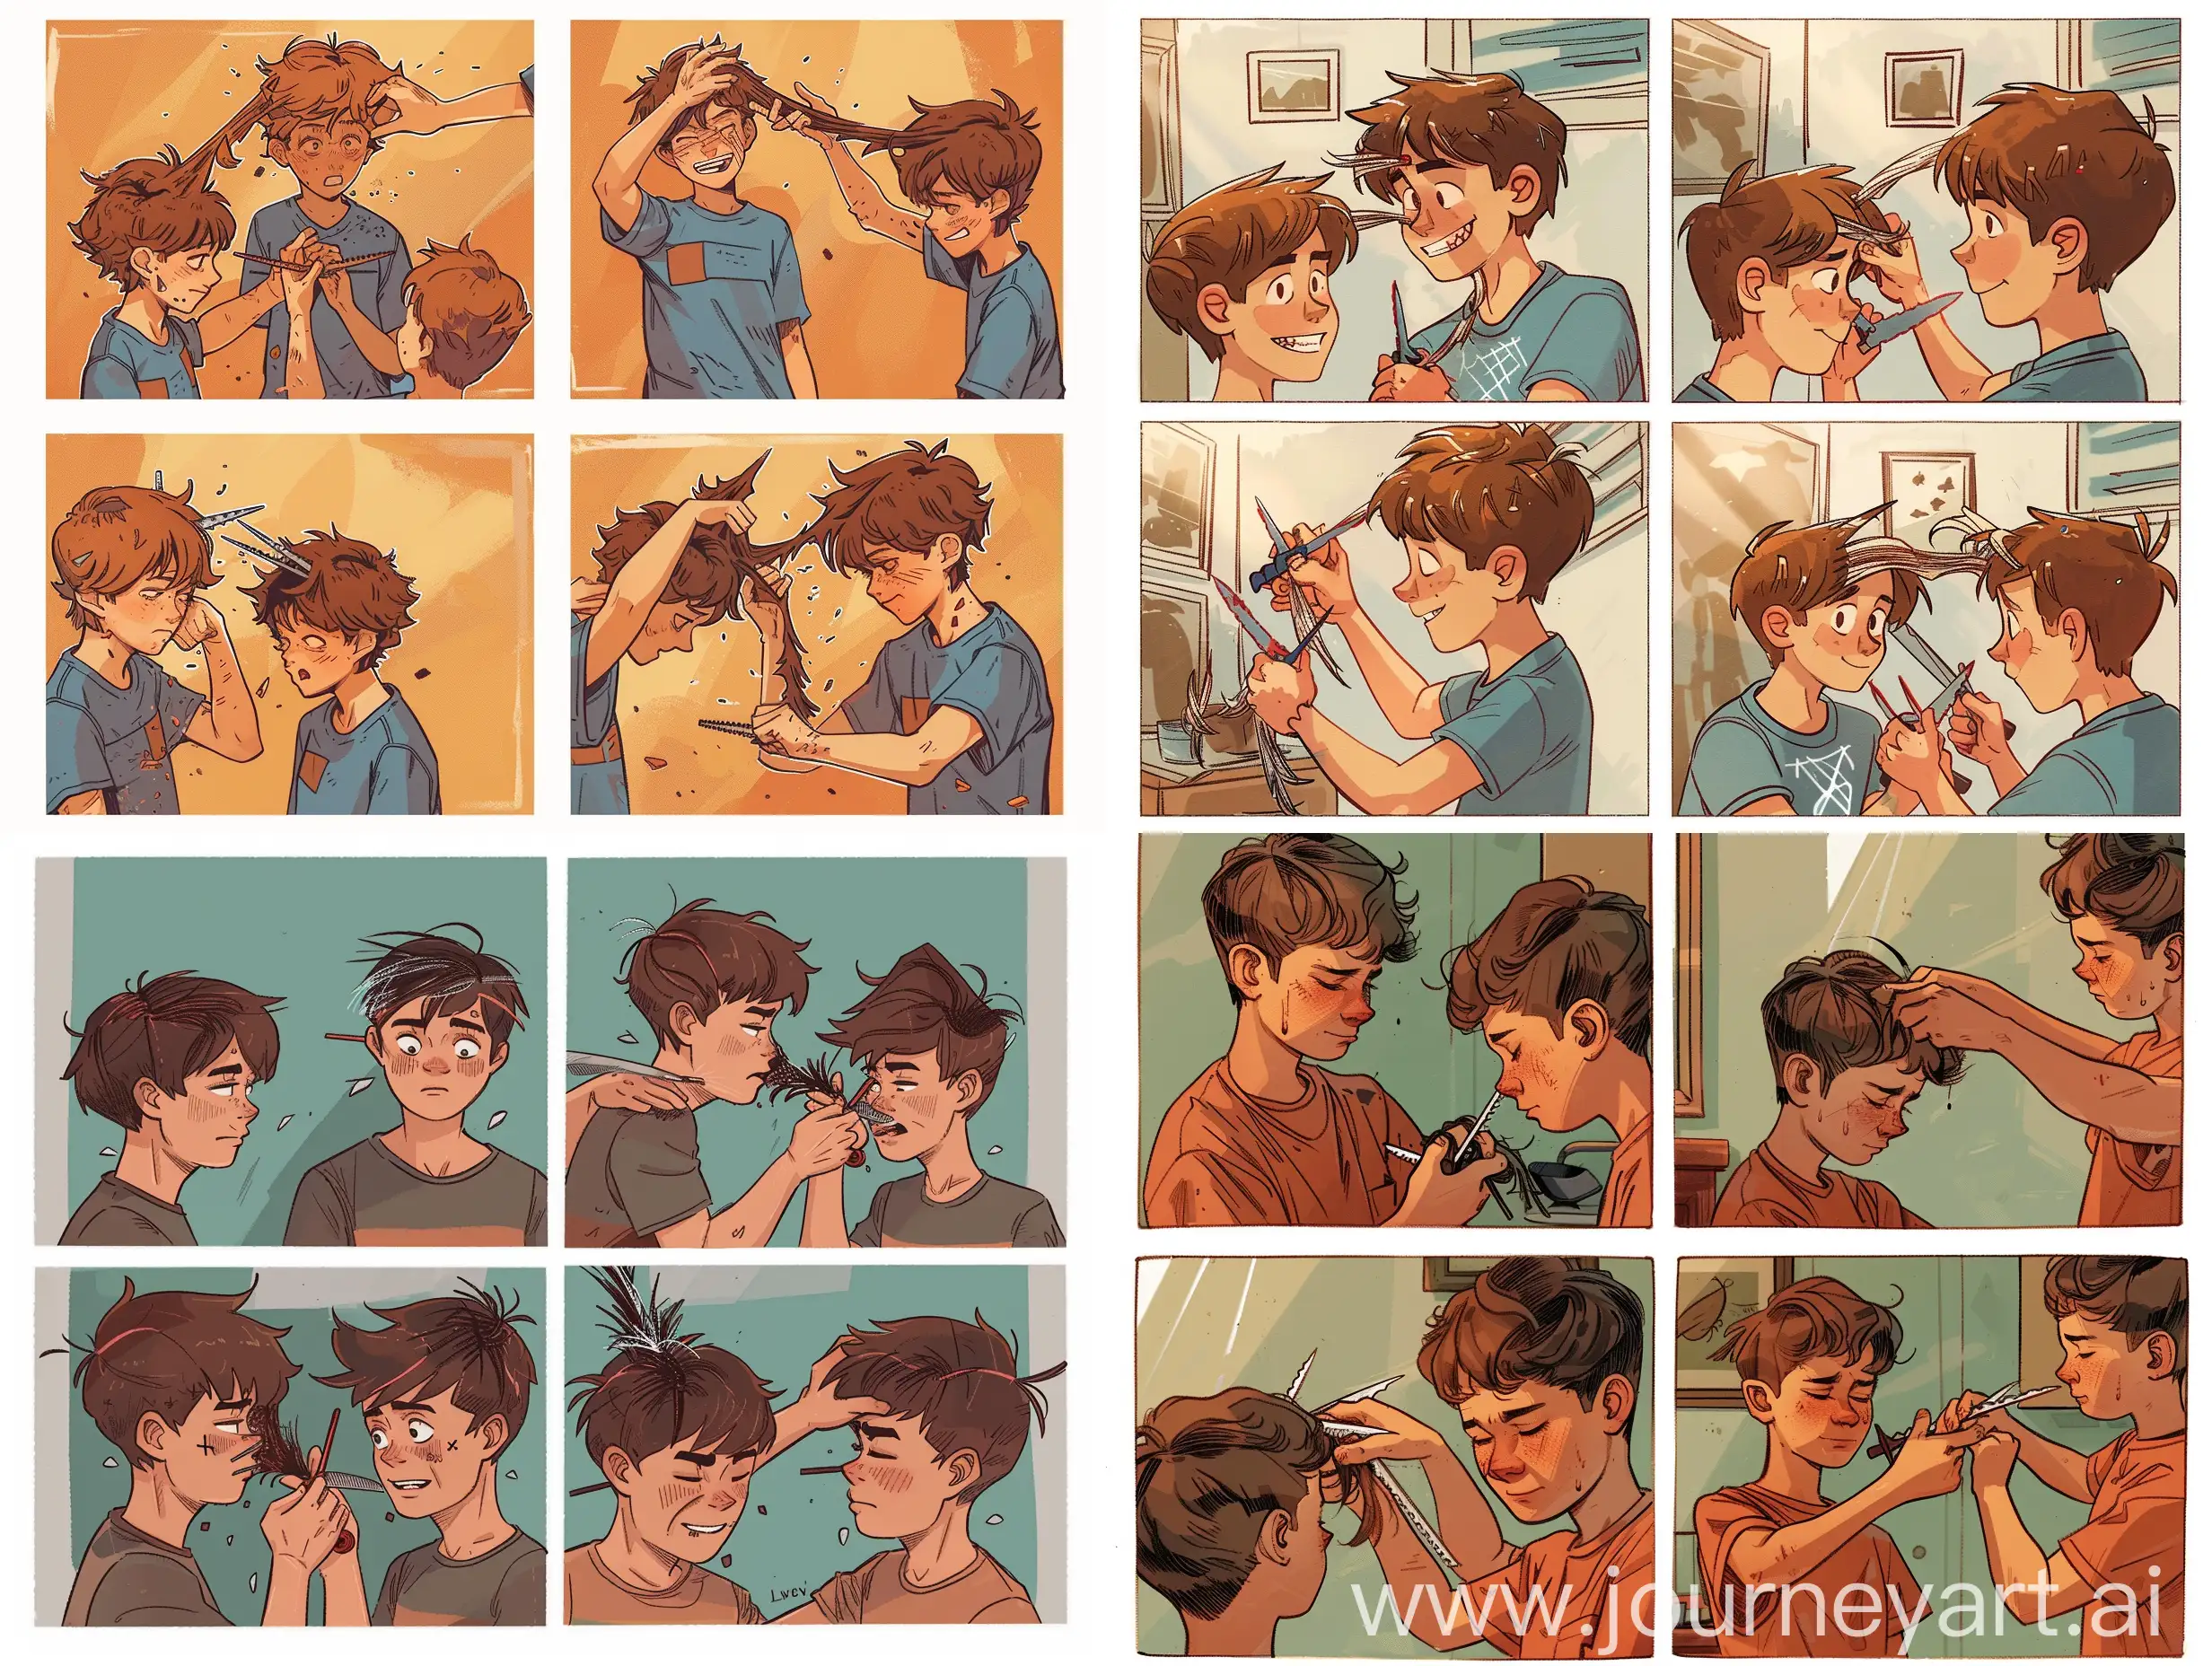 A four-part comic picture of boys cutting each other's hair and eventually cutting all their hair completely.